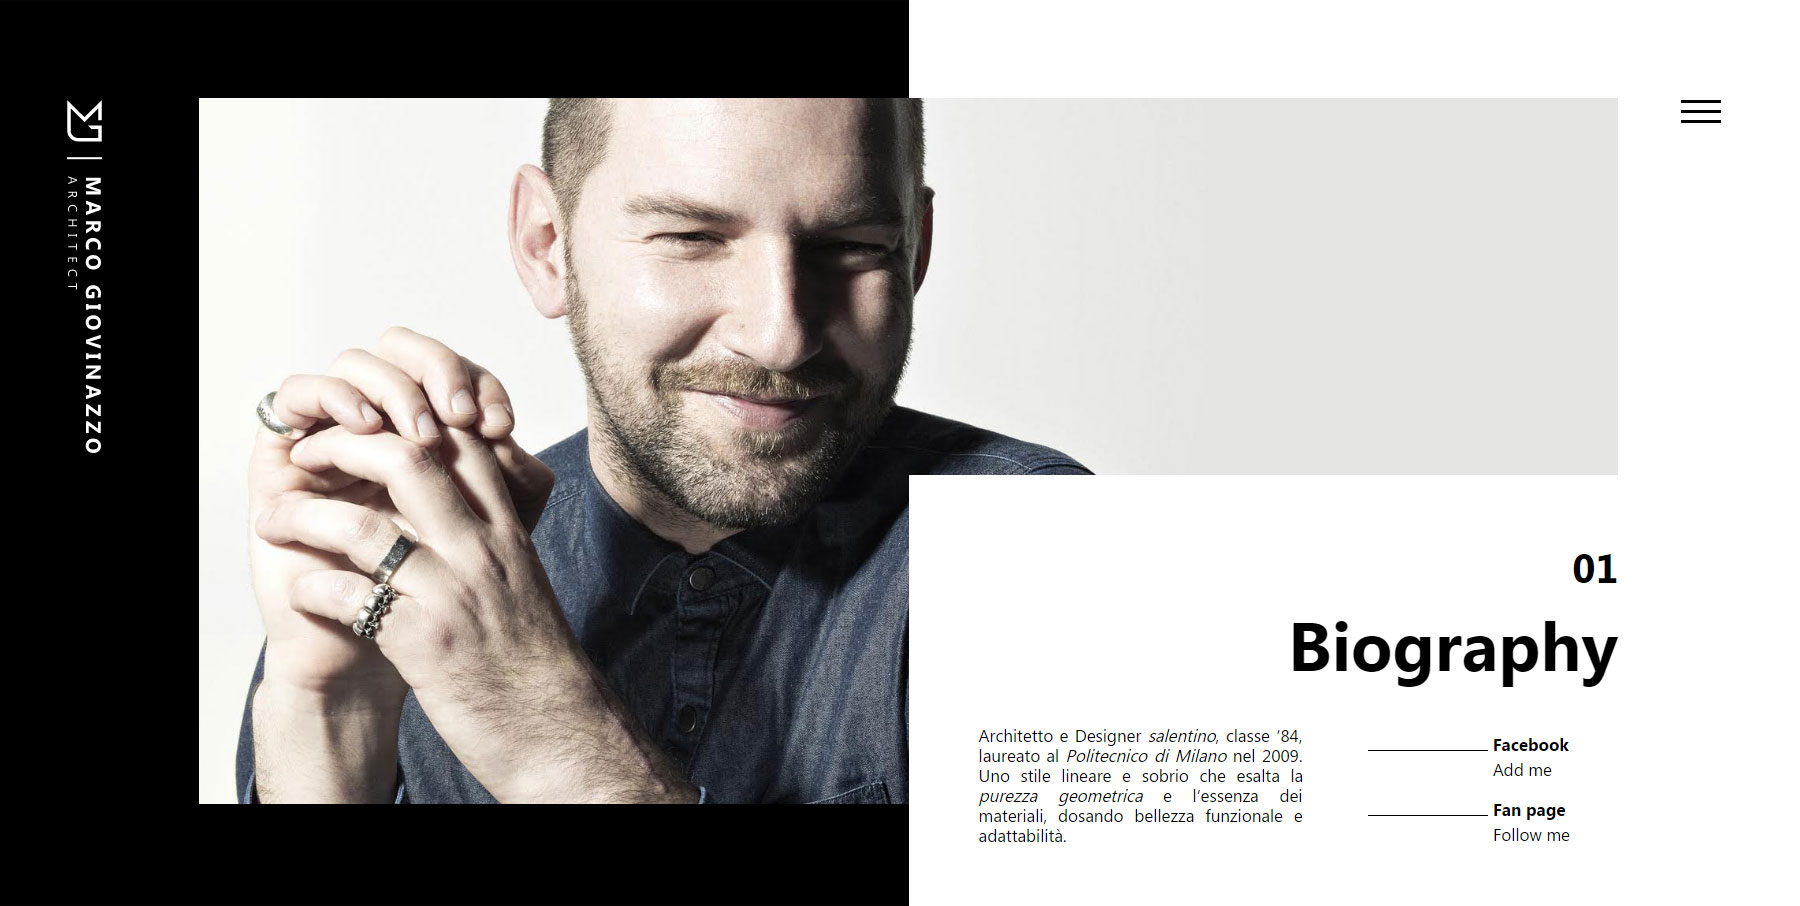 Marco Giovinazzo Architect - Website of the Day